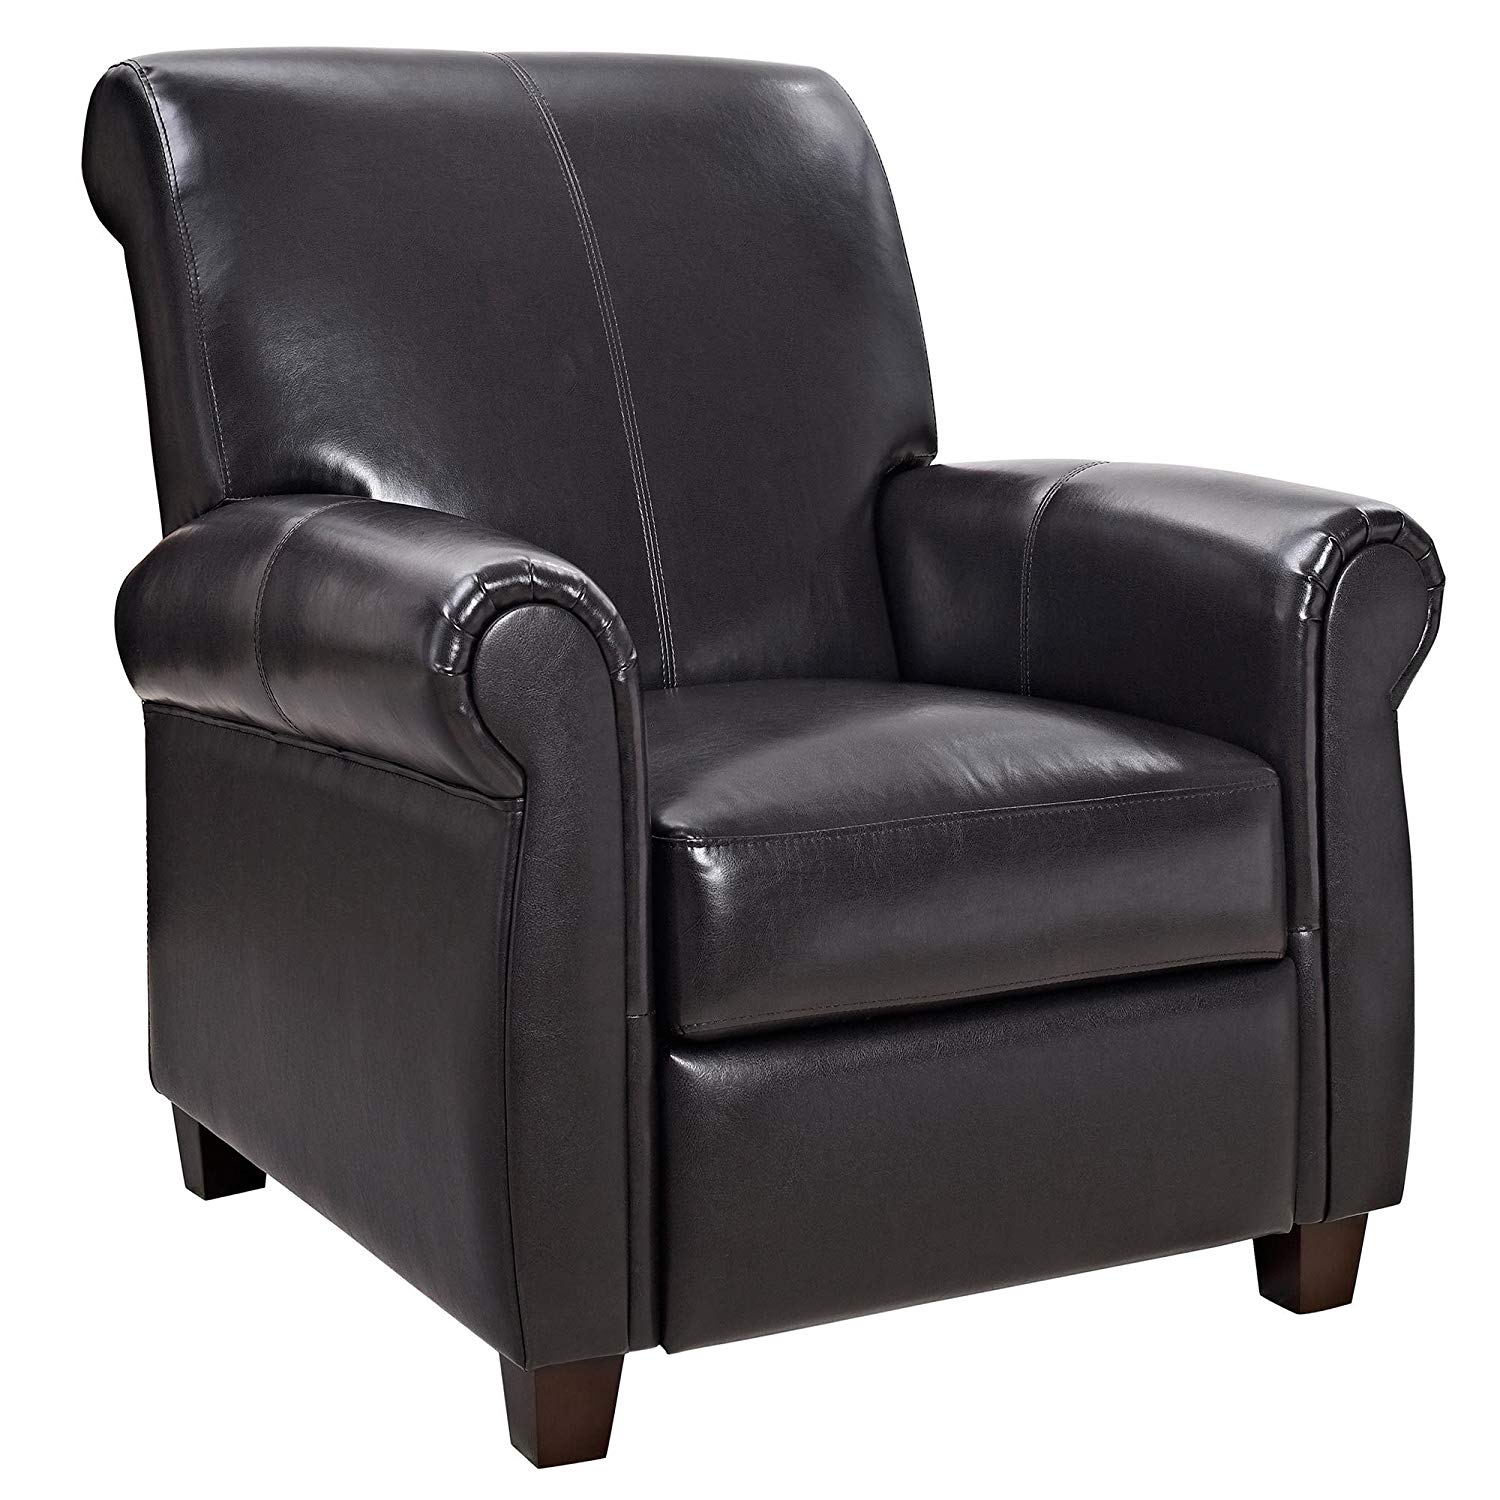 gray ashley watson pushback chairs recliners piedmont kenzie sams small pillows alexis accent rocker walworth club low leg recliner hampton chair table full size target mission